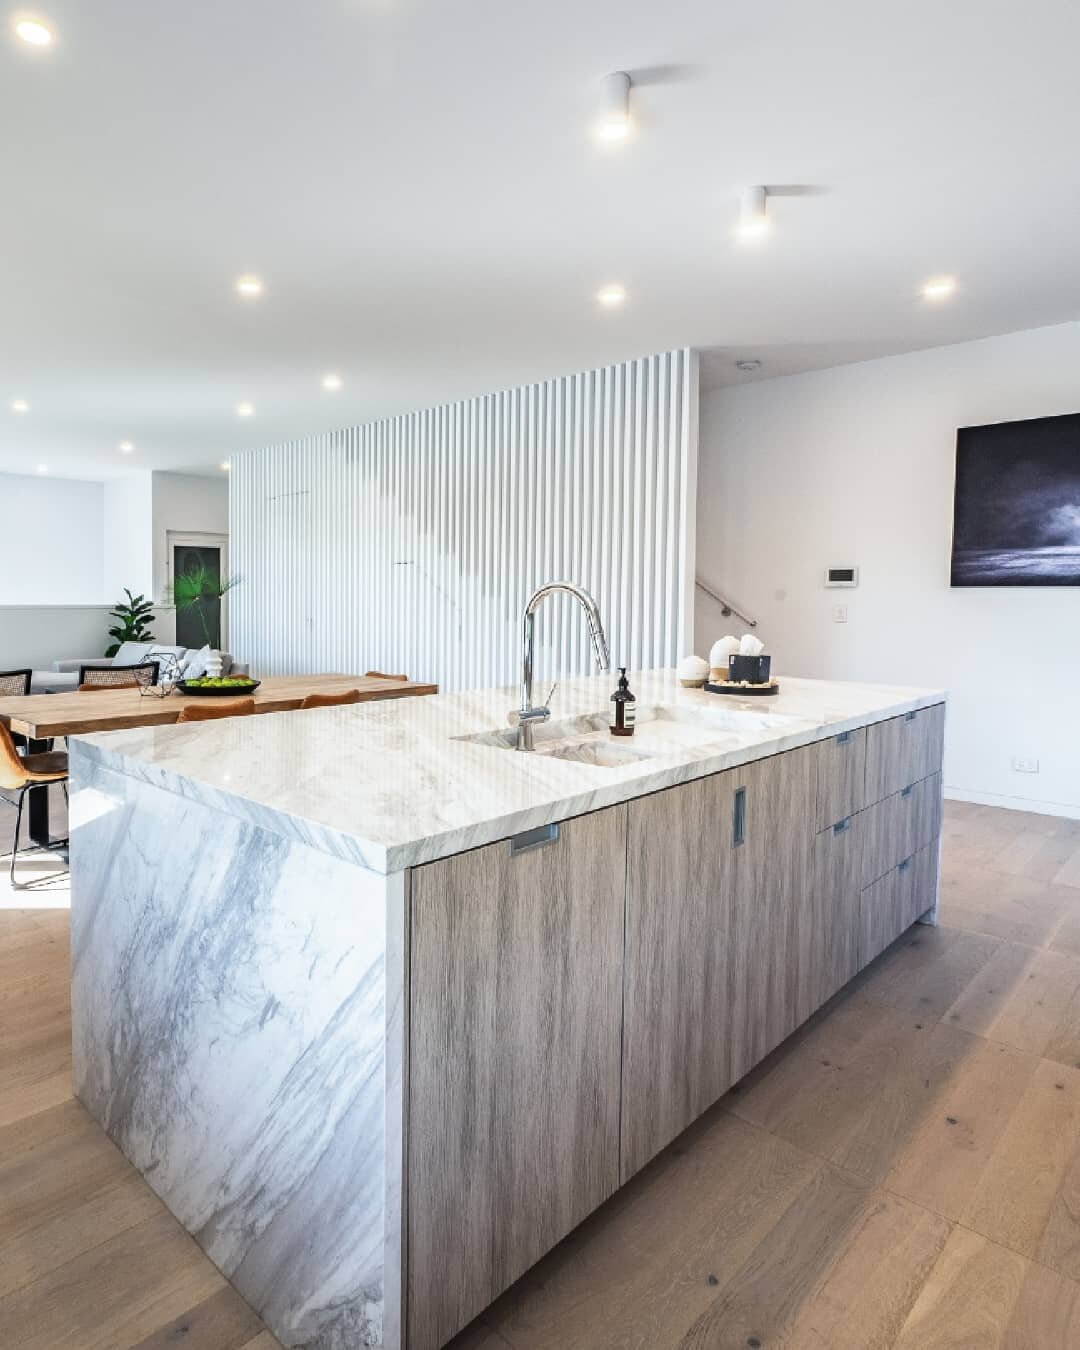 5 Benefits of Having a Great Kitchen Island...⁠
⁠
In every kitchen, there is the potential for great storage, display, and functionality.⁠
⁠
1. An island adds storage area in addition to cabinetry:⁠
And who doesn't need more storage these days!⁠
⁠
2.